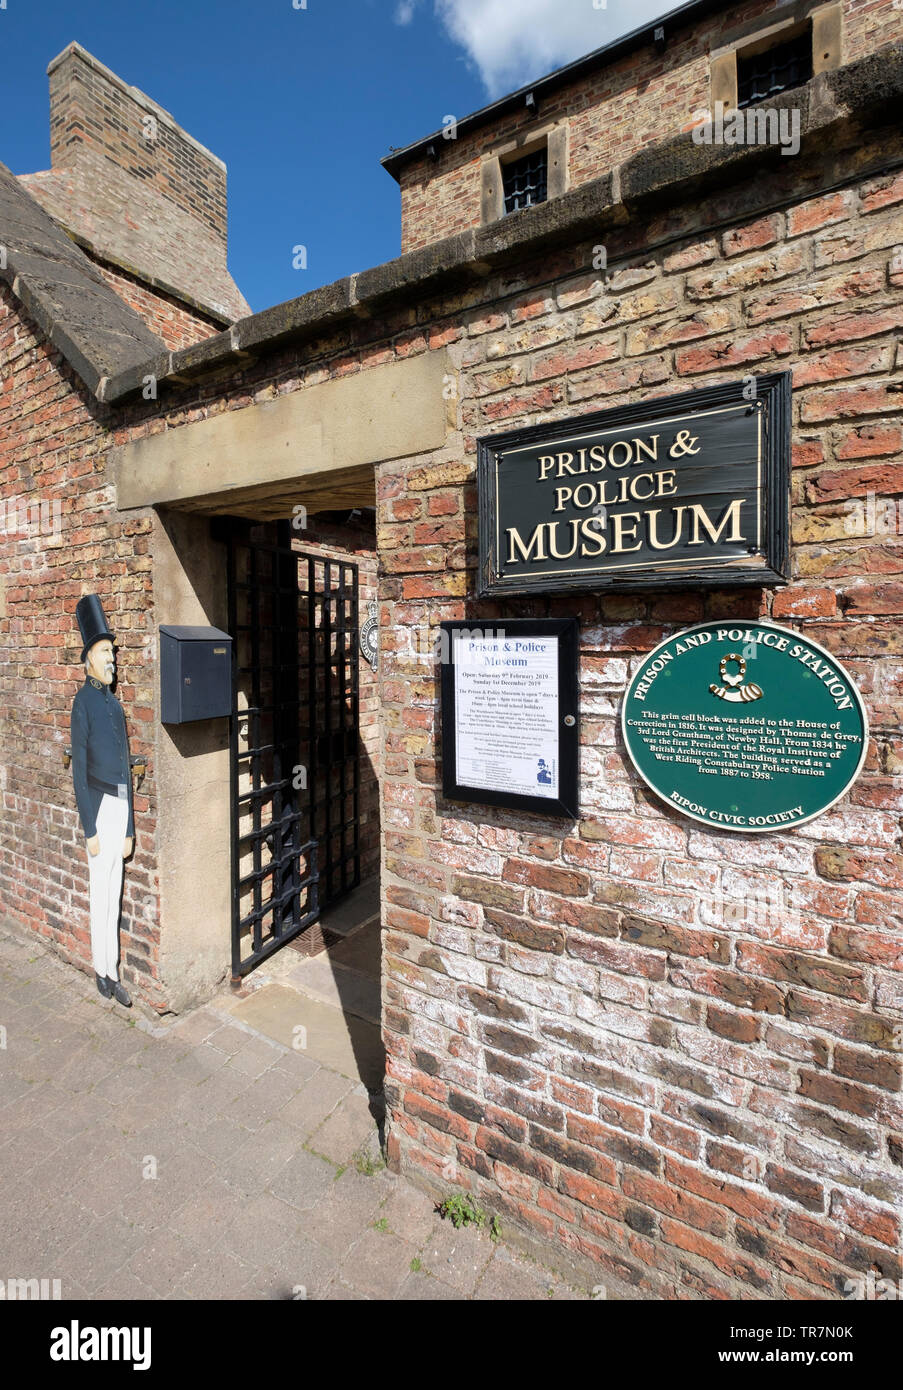 Entrance to the Prison and Police Museum, Ripon, North Yorkshire, UK Stock Photo